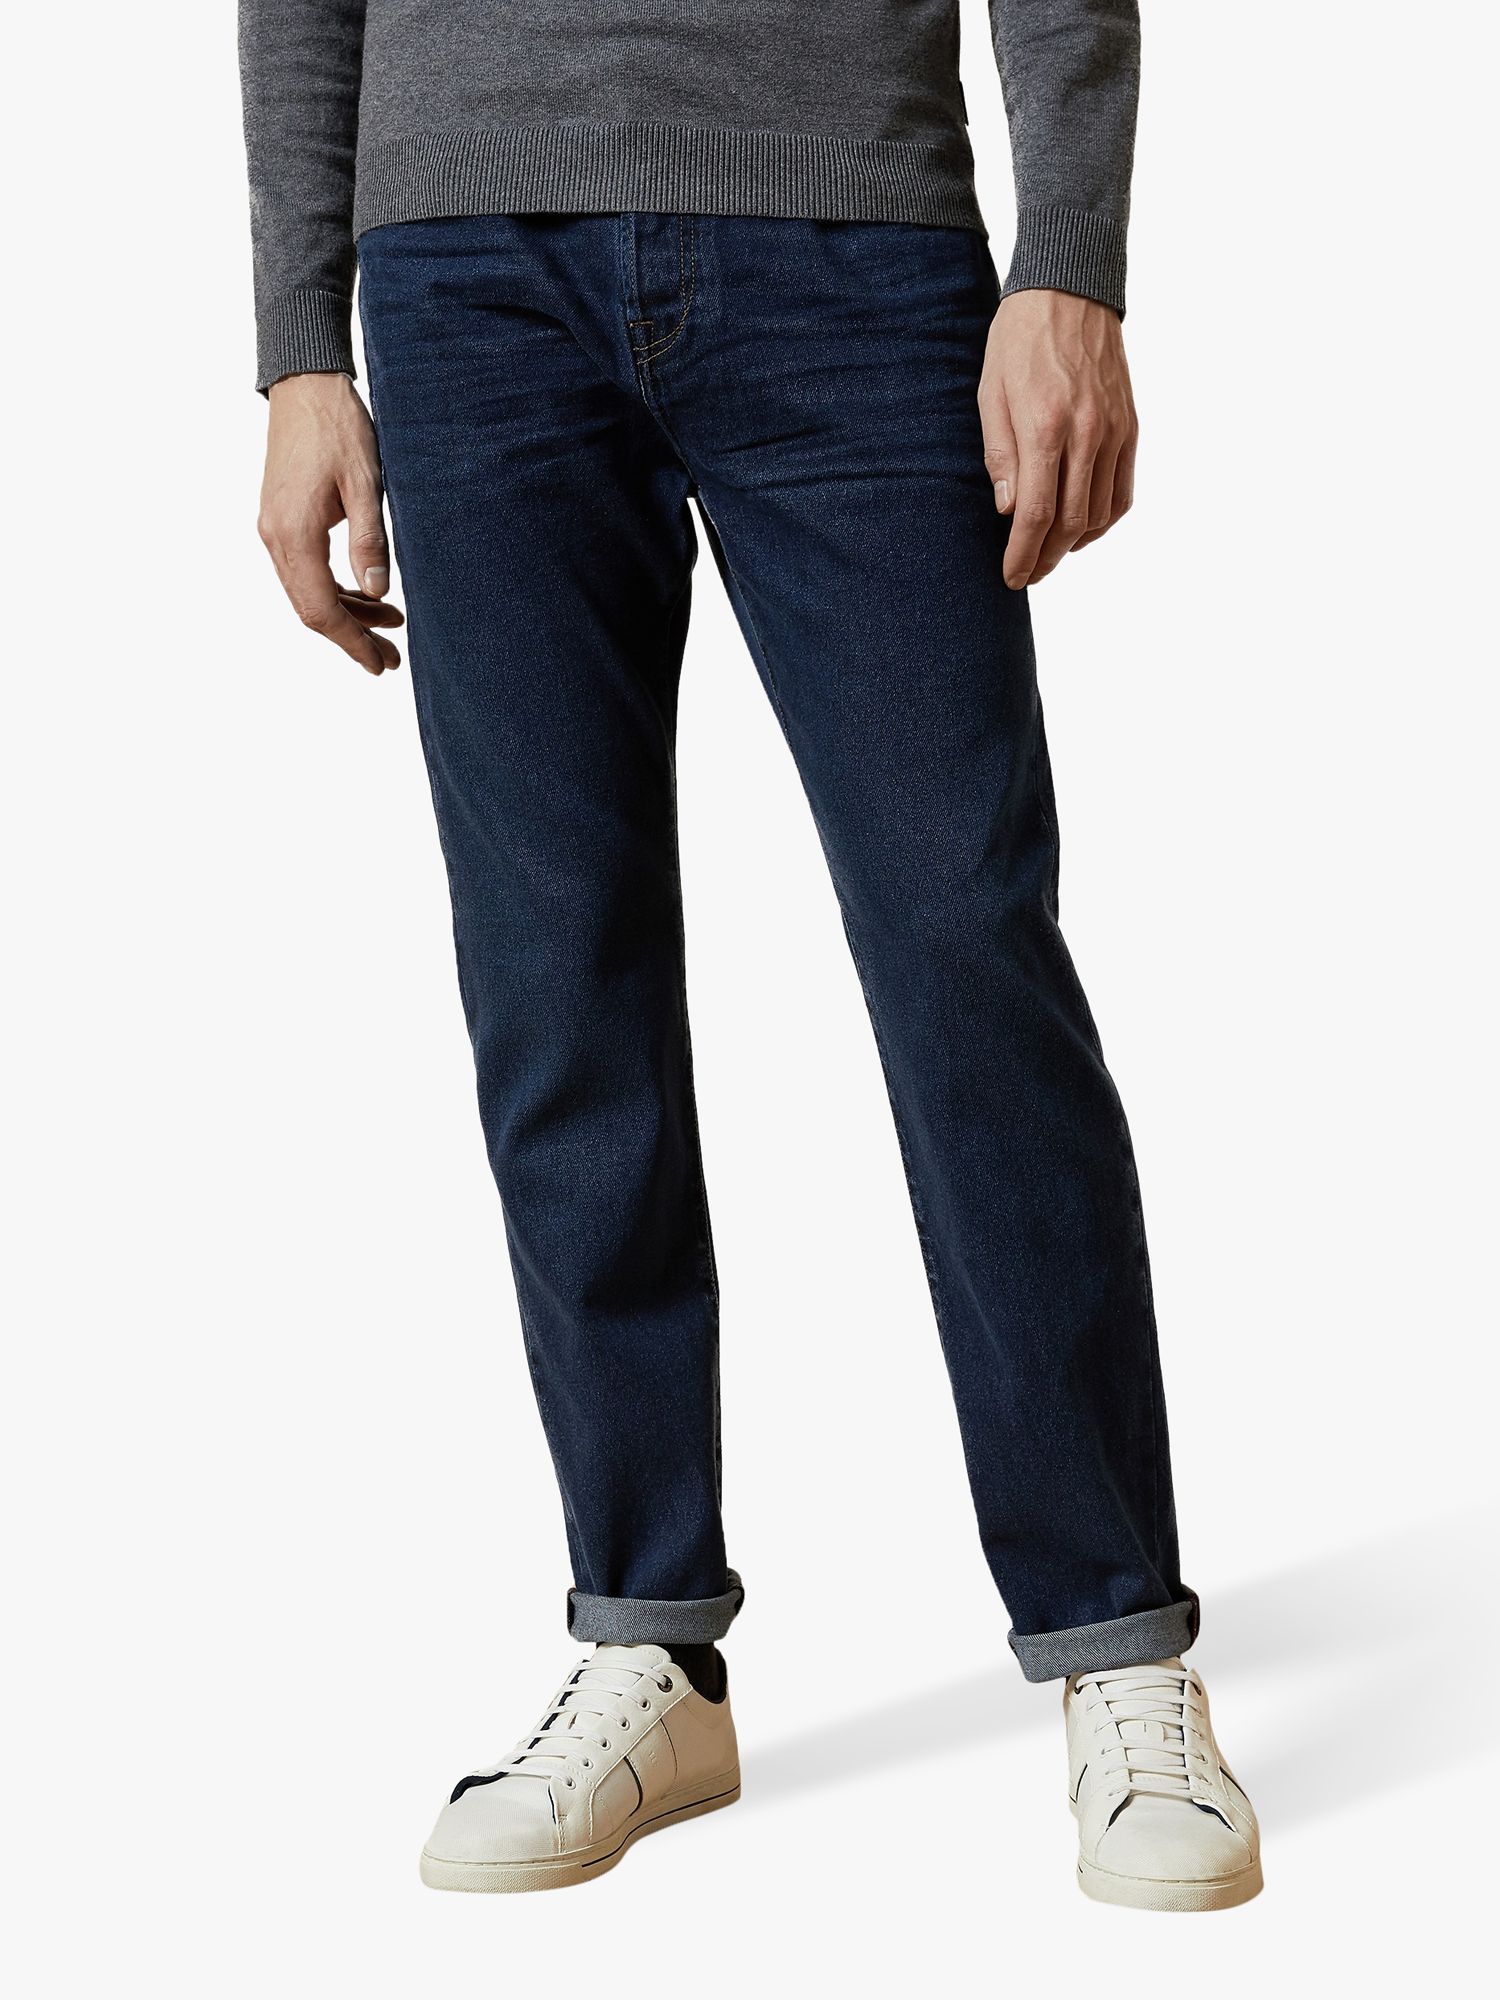 Ted Baker Solang Straight Fit Washed Denim Jeans at John Lewis & Partners